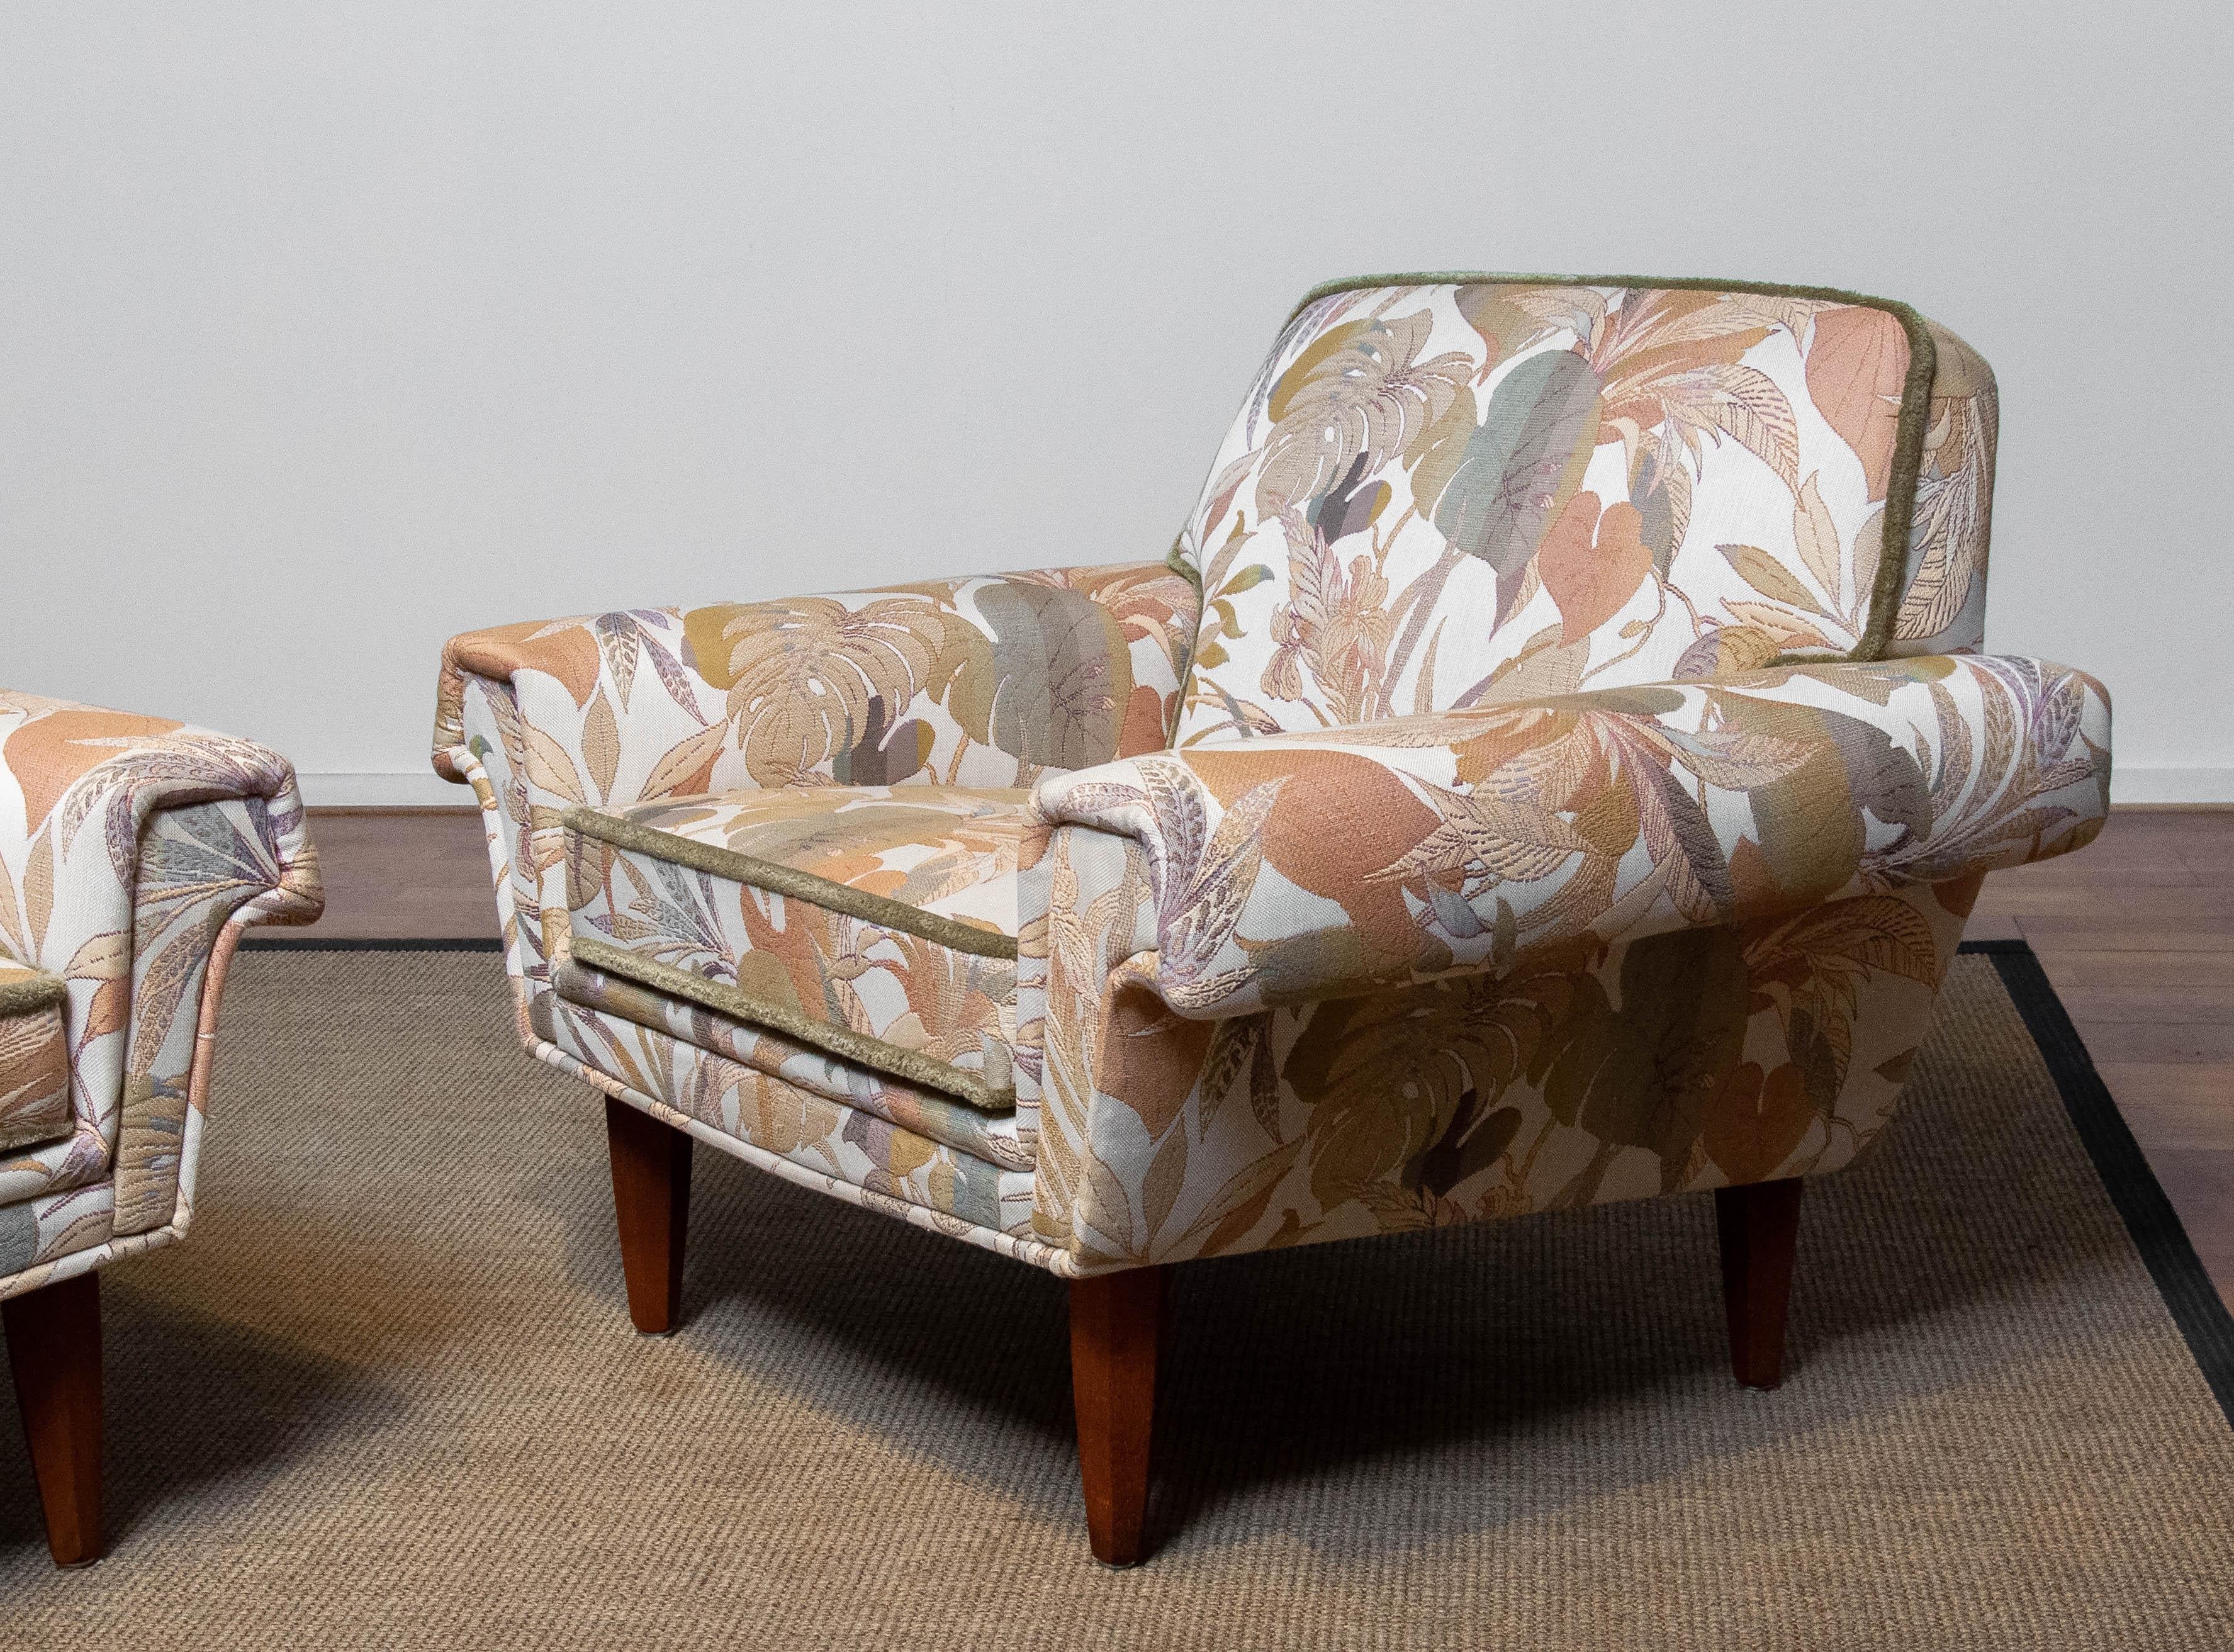 Hollywood Regency Pair Low Back Lounge Chairs Upholstered Floral Jacquard Fabric From Denmark 1970 For Sale